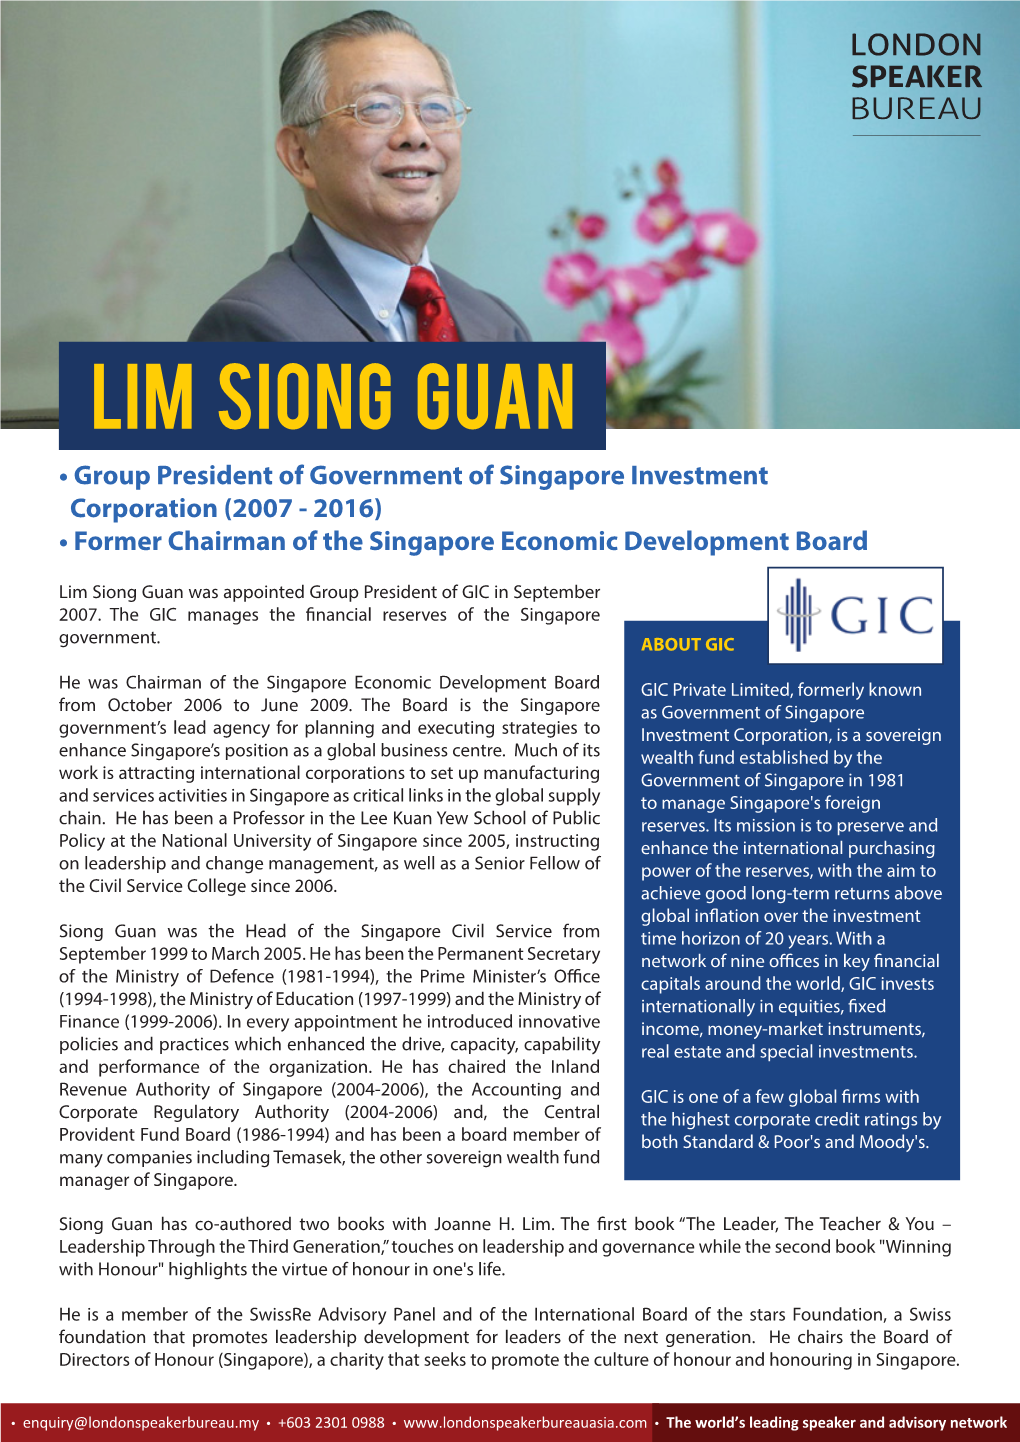 Lim Siong Guan • Group President of Government of Singapore Investment Corporation (2007 - 2016) • Former Chairman of the Singapore Economic Development Board